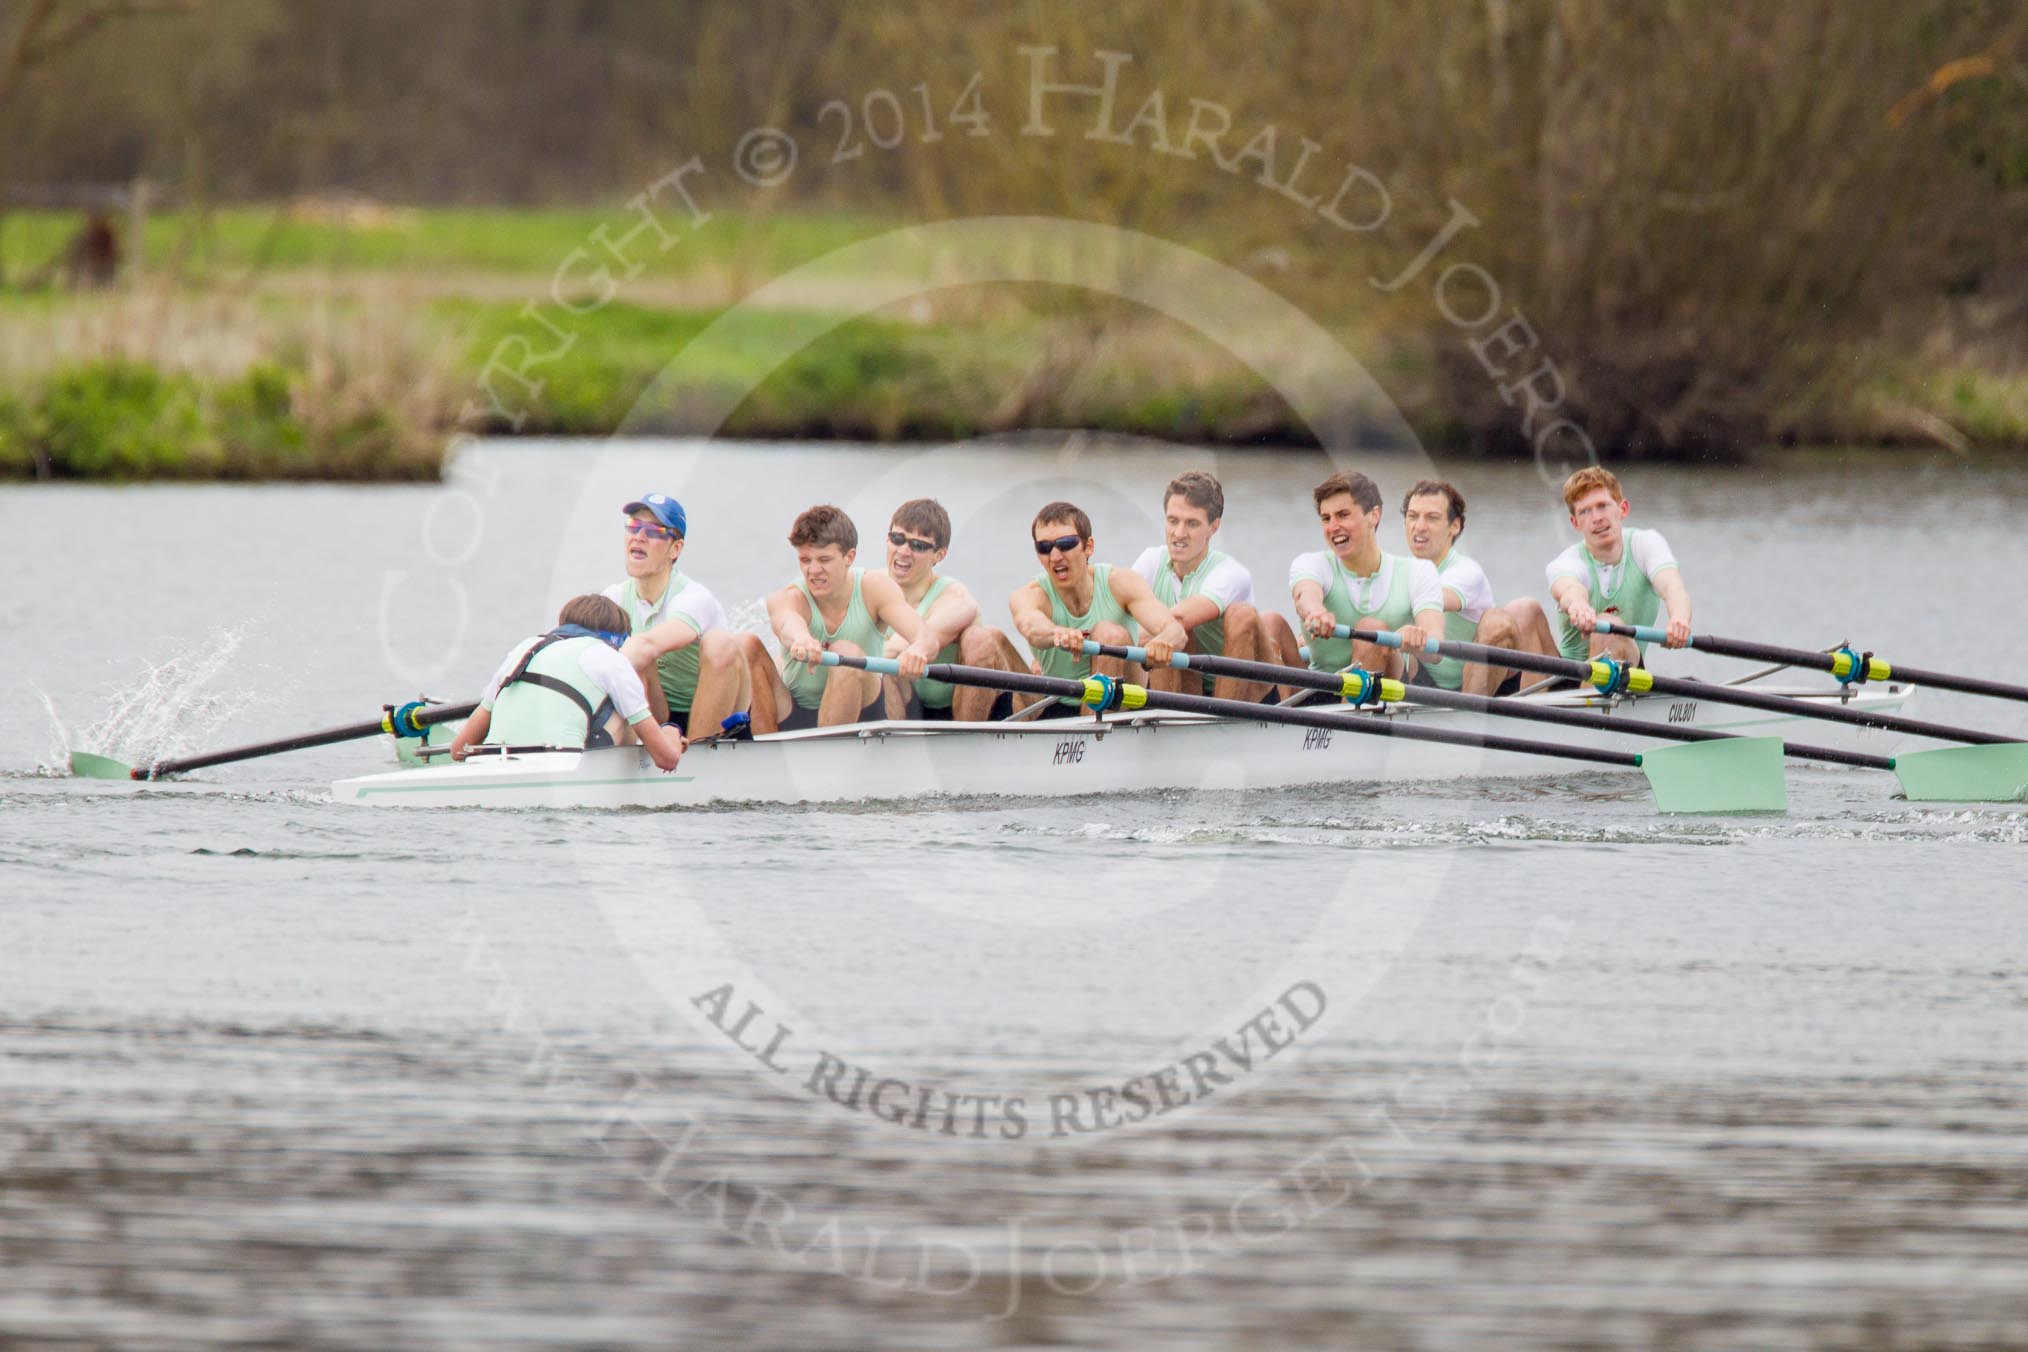 The Women's Boat Race and Henley Boat Races 2014: The Lightweight Men's Boat Race - OULRC vs CULRC. The leading Cambridge boat is approaching the finish line..
River Thames,
Henley-on-Thames,
Buckinghamshire,
United Kingdom,
on 30 March 2014 at 15:40, image #394